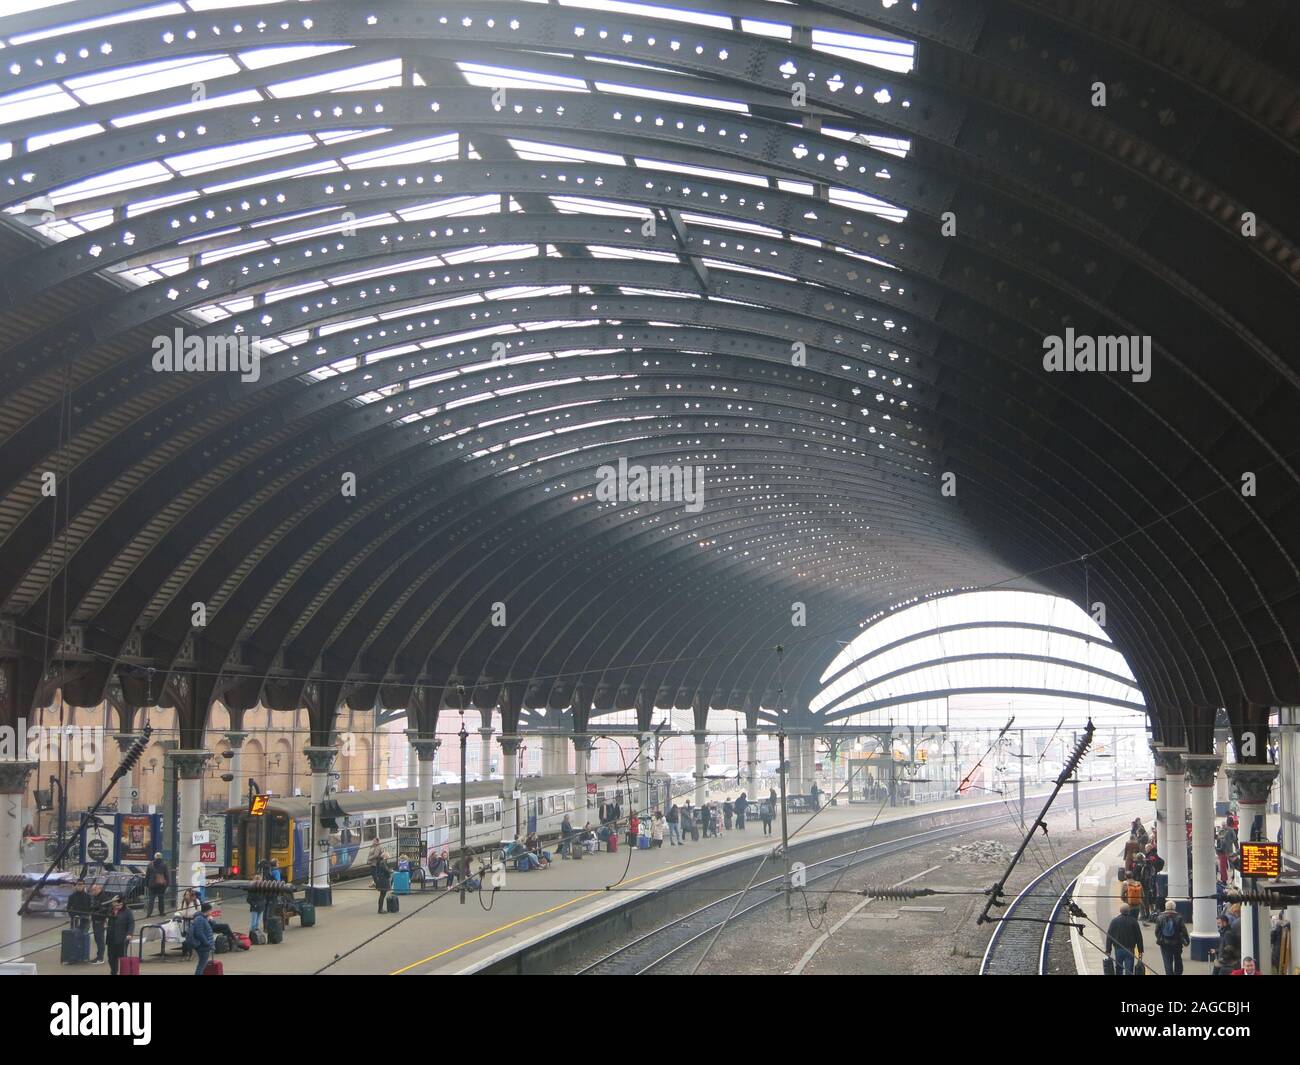 largest train station in the world